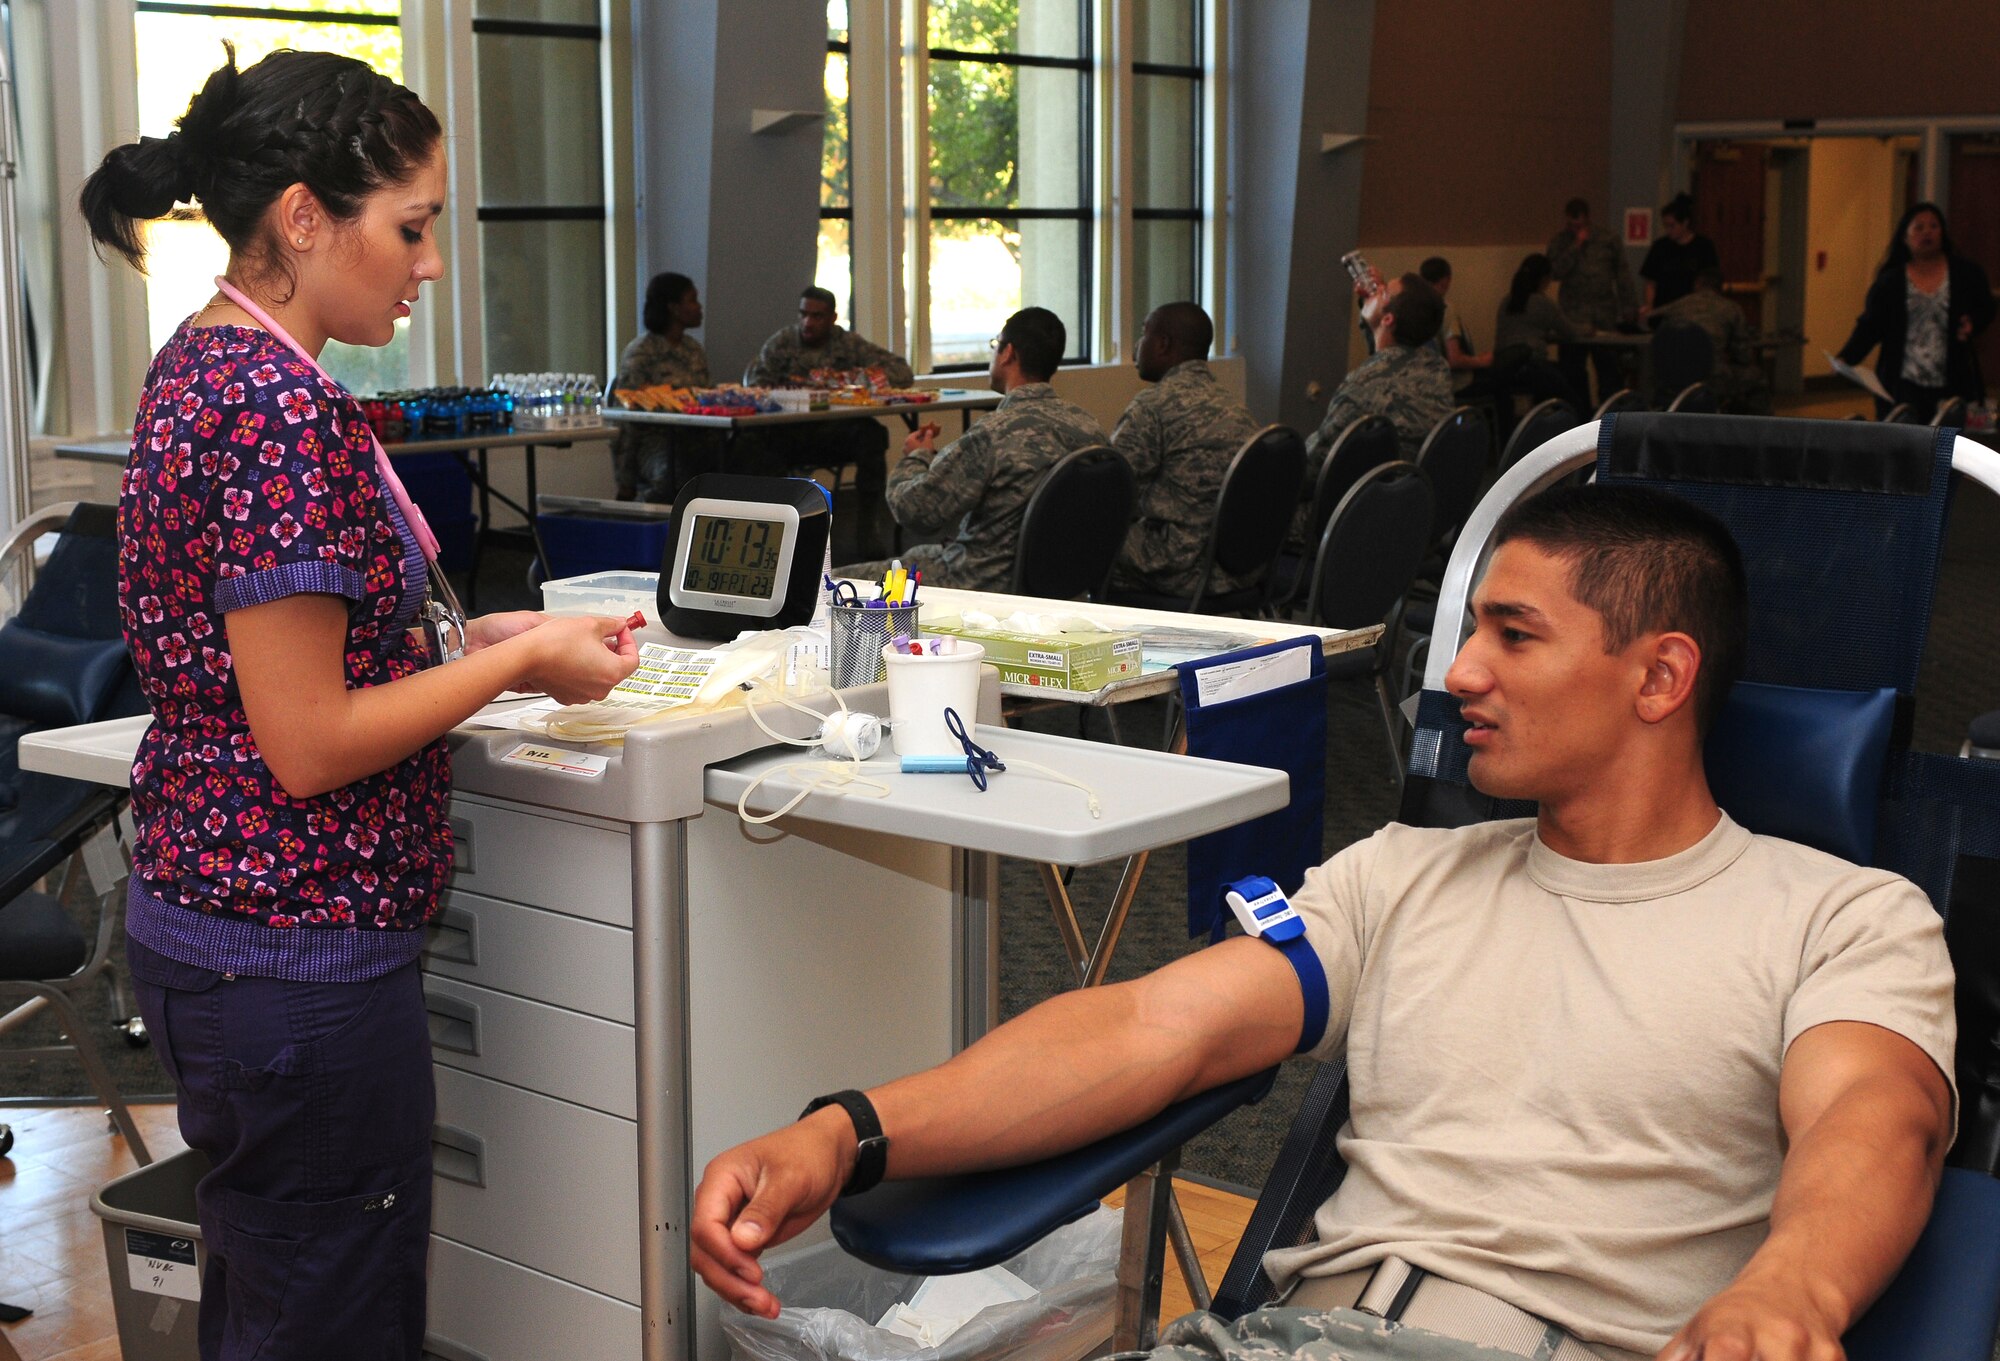 Valorie Guerra, Blood Source phlebotomist, preps for a blood donation from Airman Basic Raymond Rubio, 372th Training Squadron crew chief student, at the Beale Air Force Base, Calif. community activity center Oct. 19, 2012. Each donation of blood has the ability to save up to three lives. (U.S. Air Force photo by Senior Airman Allen Pollard)